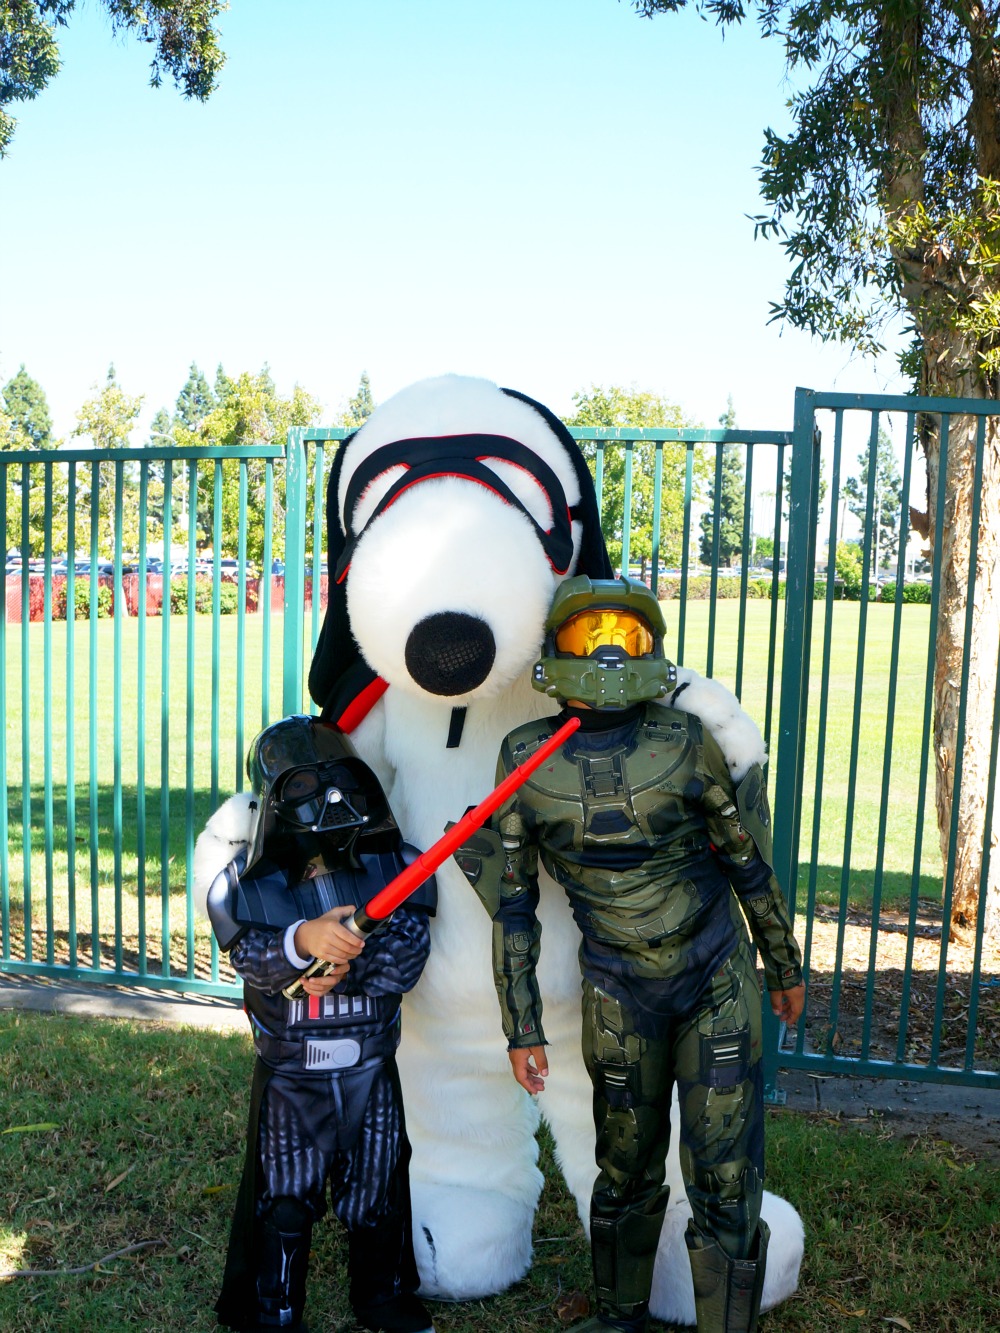 Snoopy with kids in costume